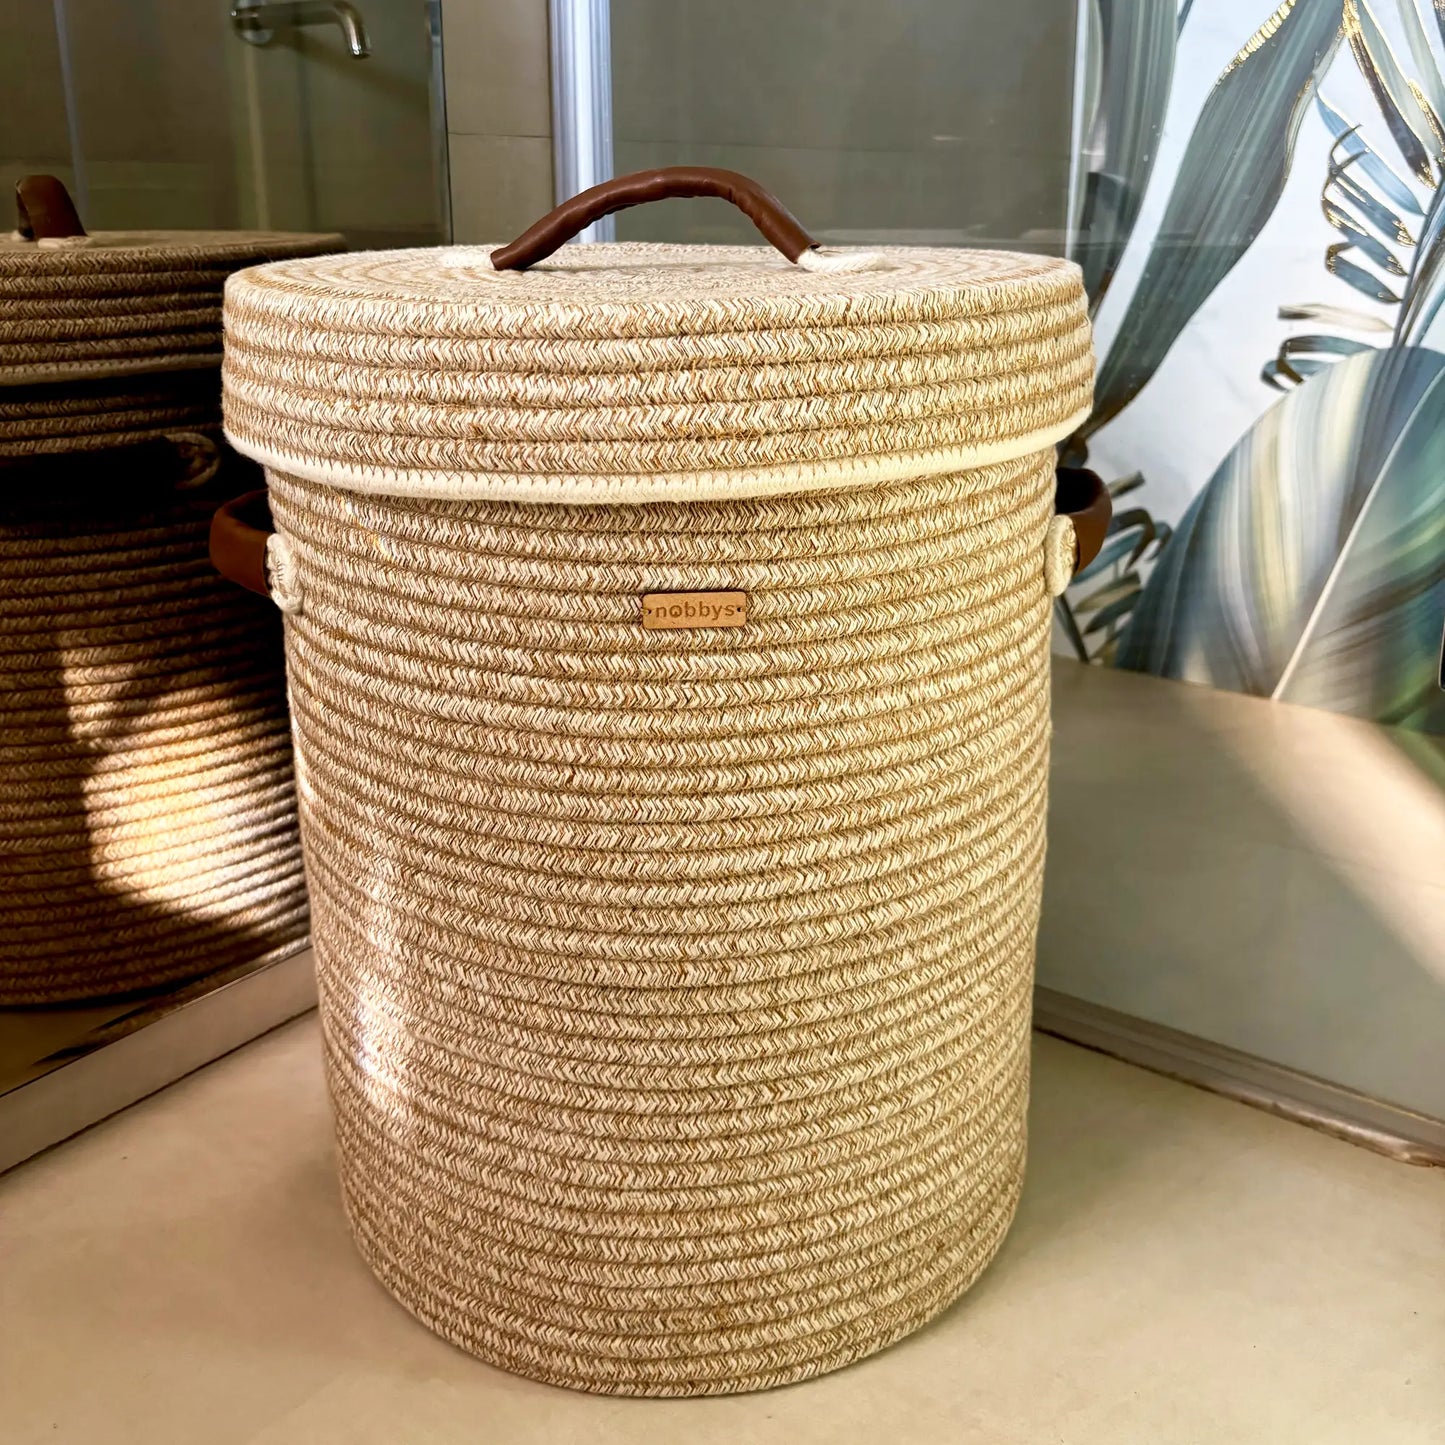 Ivory Laundry Basket with Leather Handles and Bottom Spacers